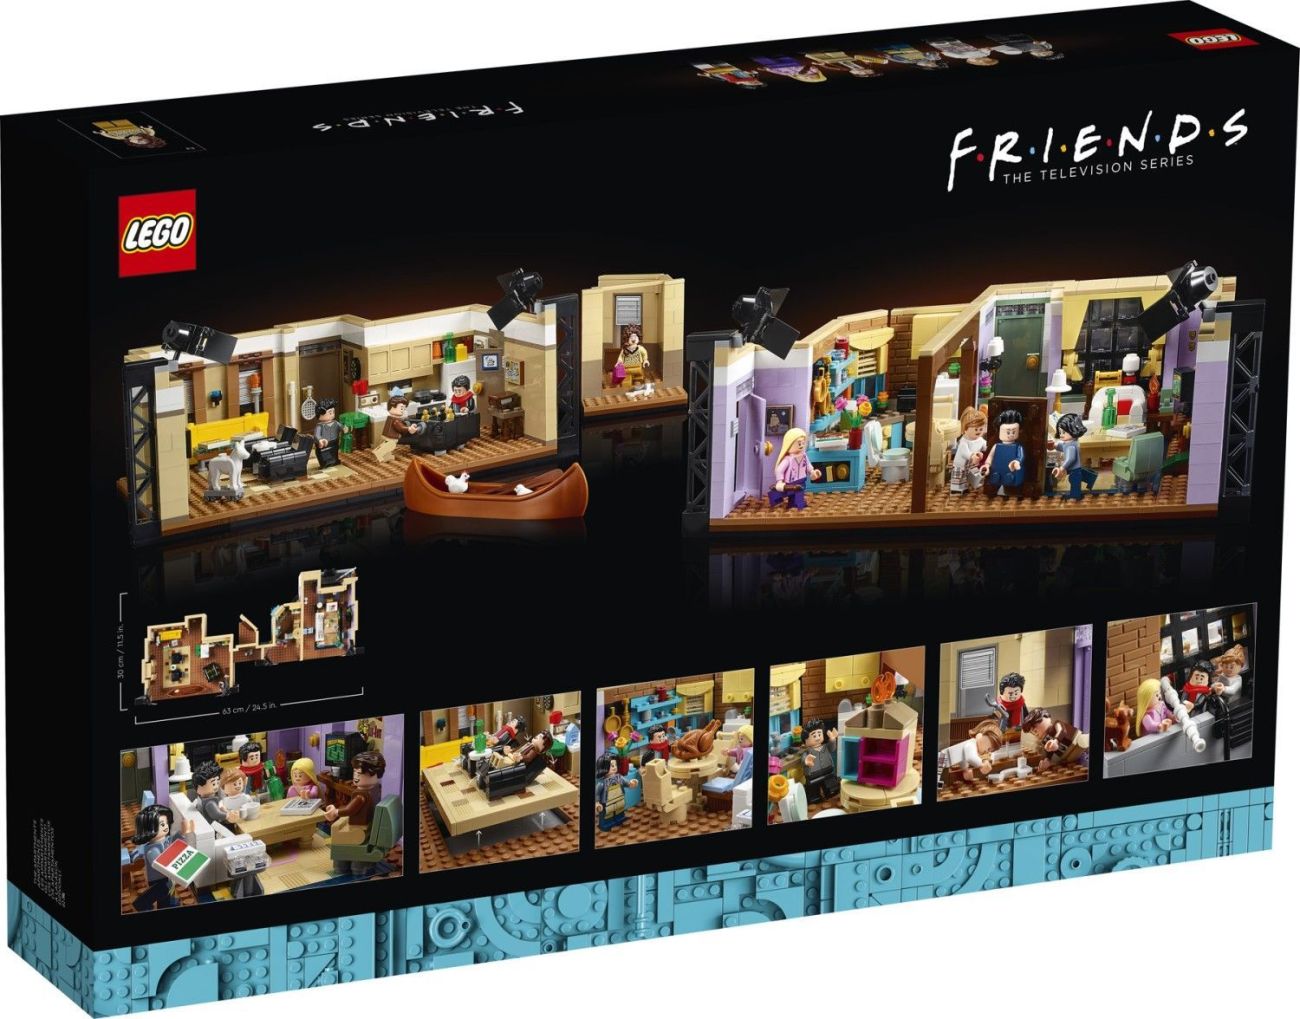 LEGO FRIENDS 10292 The Apartments